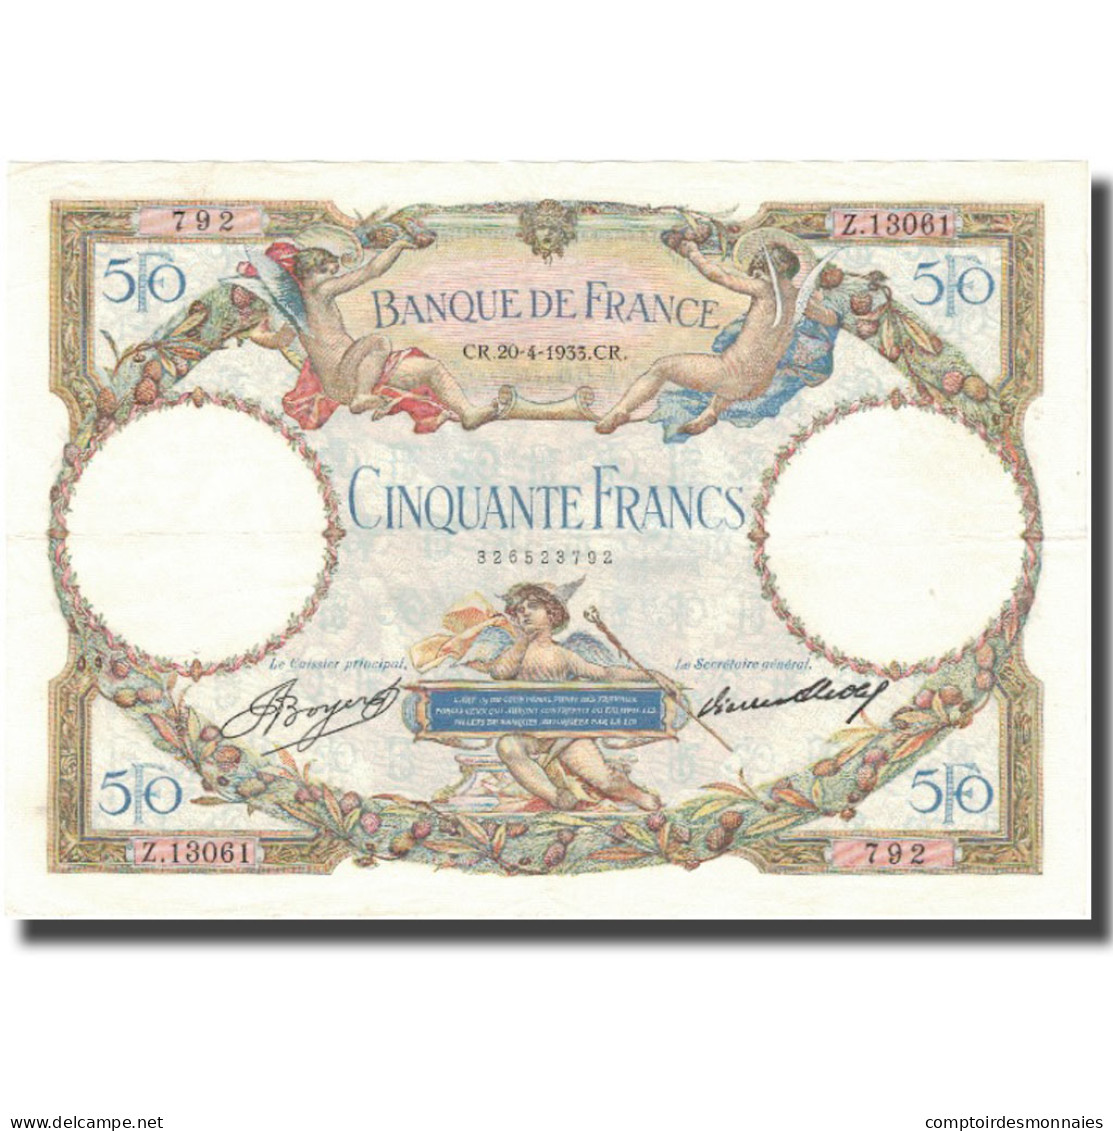 France, 50 Francs, Luc Olivier Merson, 1933, 1933-04-20, SUP, Fayette:16.4 - 50 F 1927-1934 ''Luc Olivier Merson''